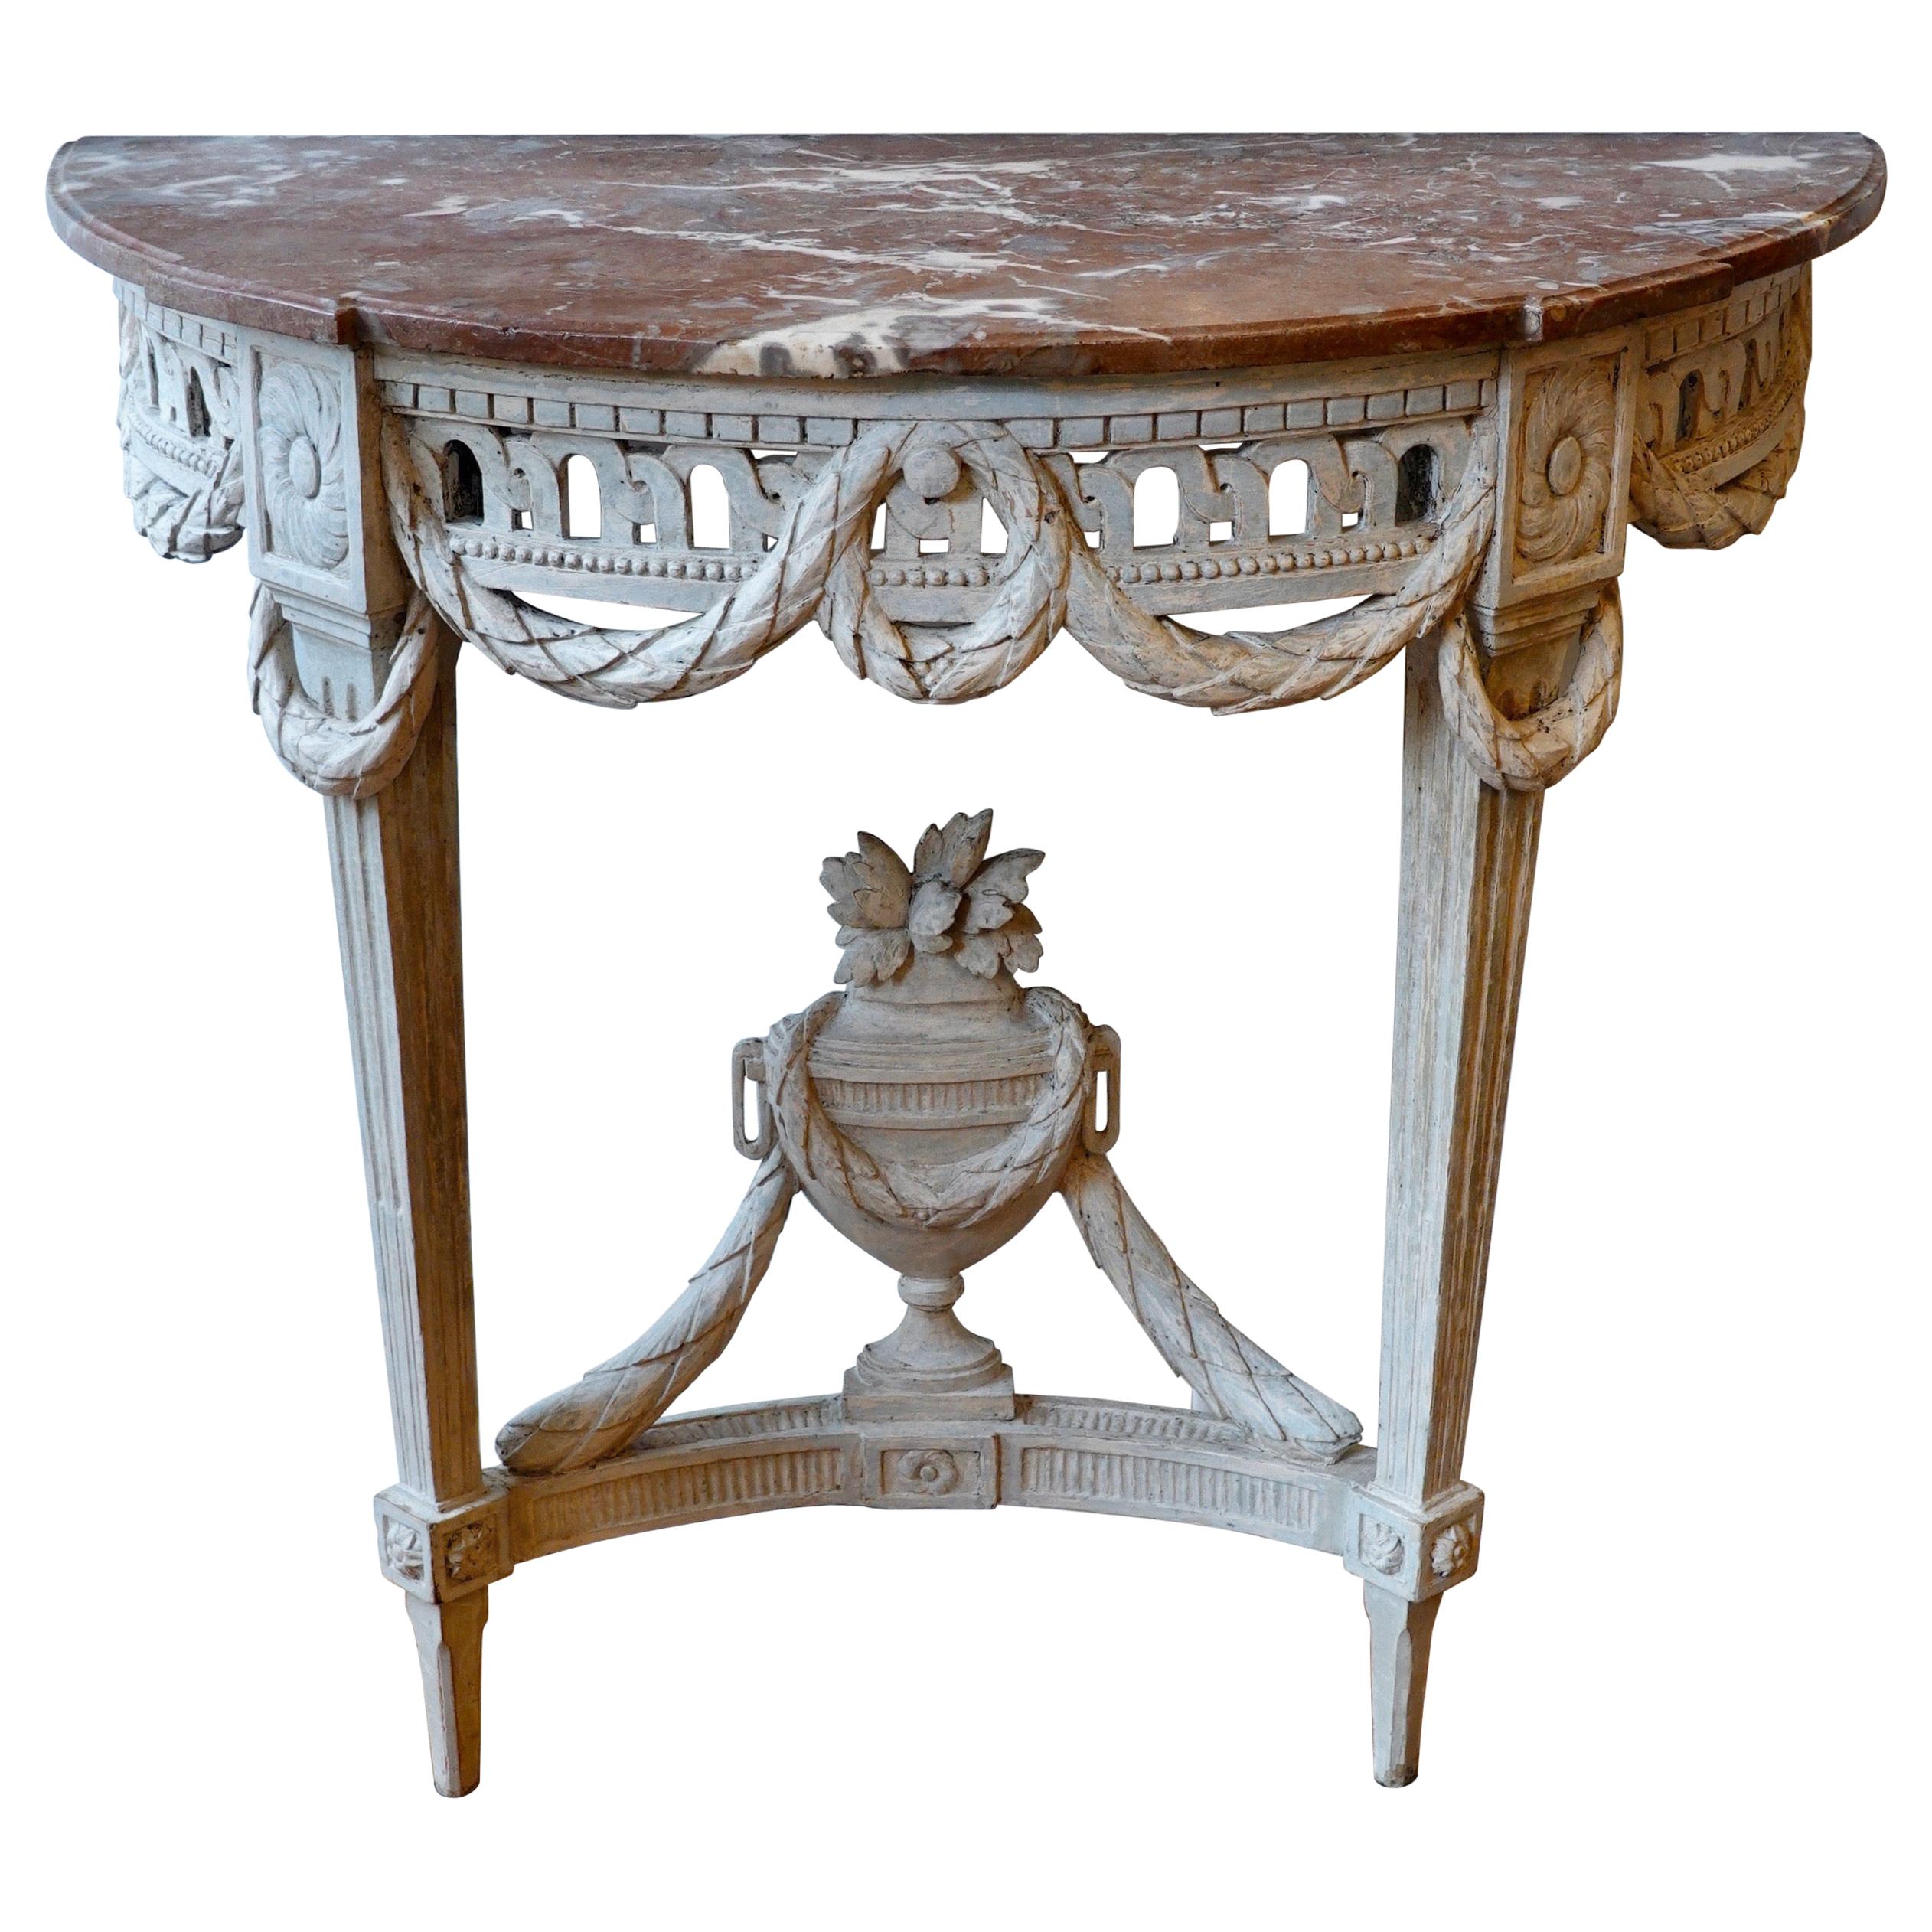 Louis XVI Period Painted Console Table with Variegated Marble Top